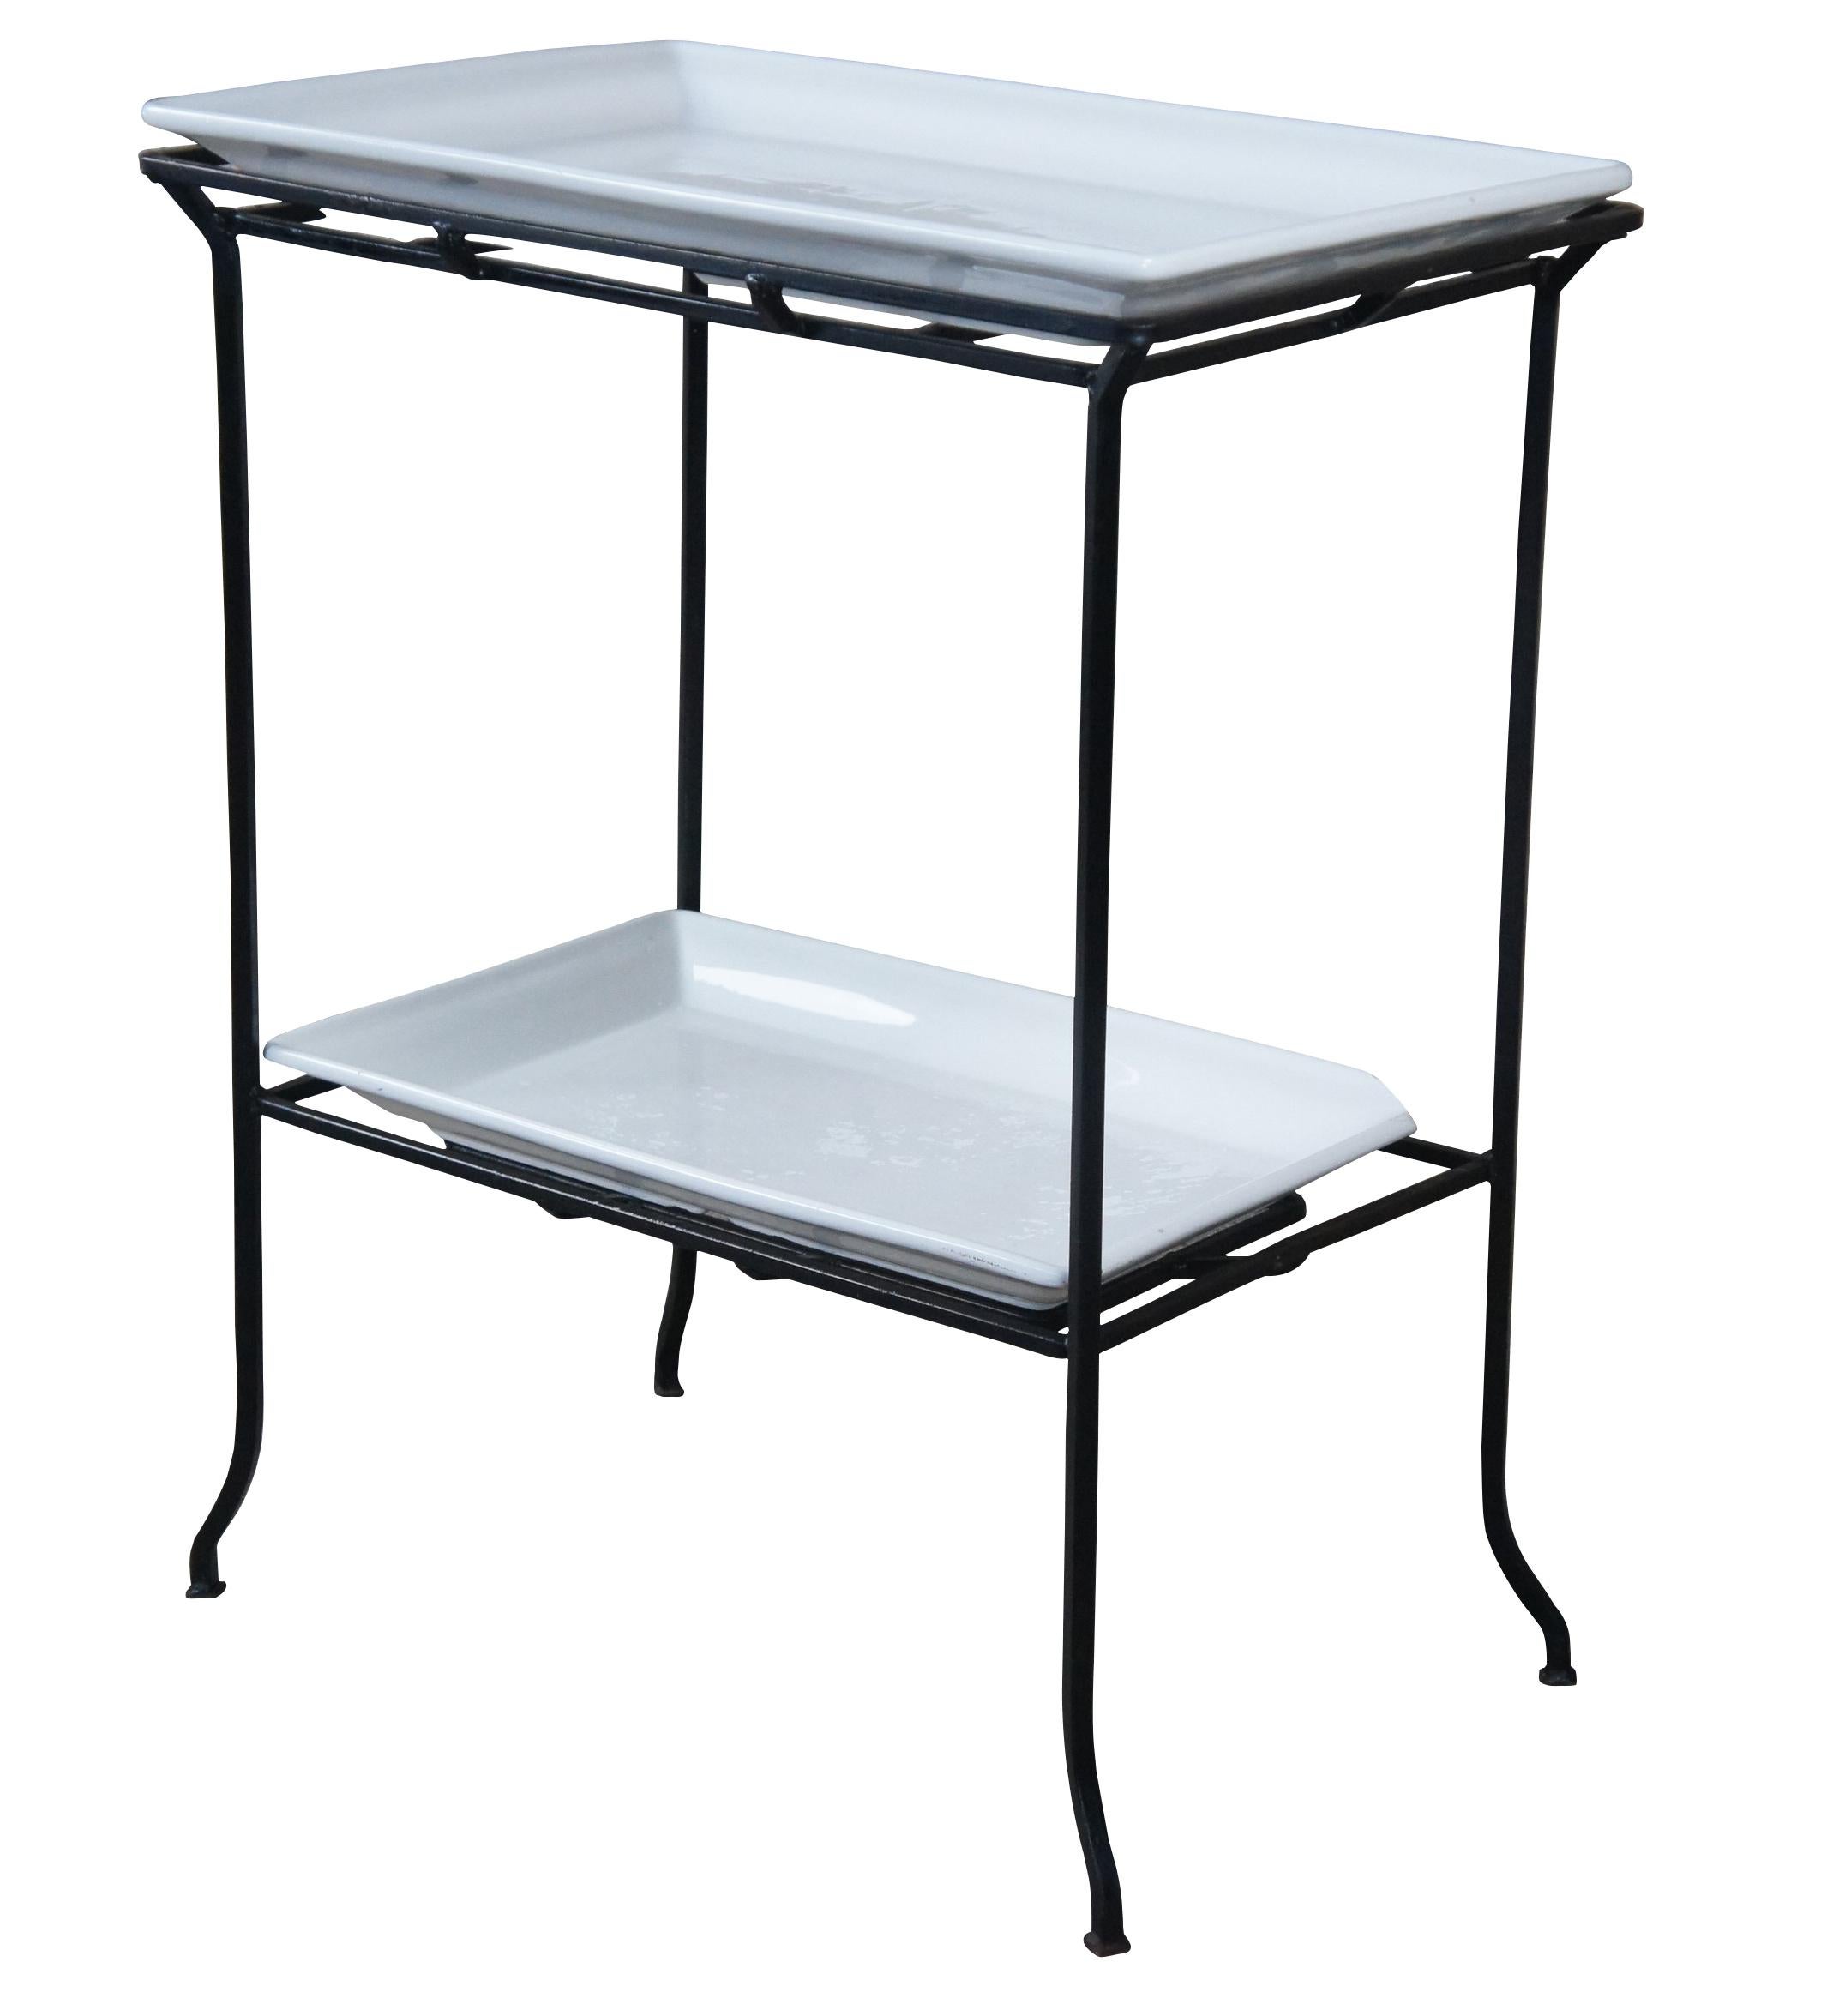 Industrial iron two tier table with porcelain inserts. Great for use as a dry bar, tray table or flower display.